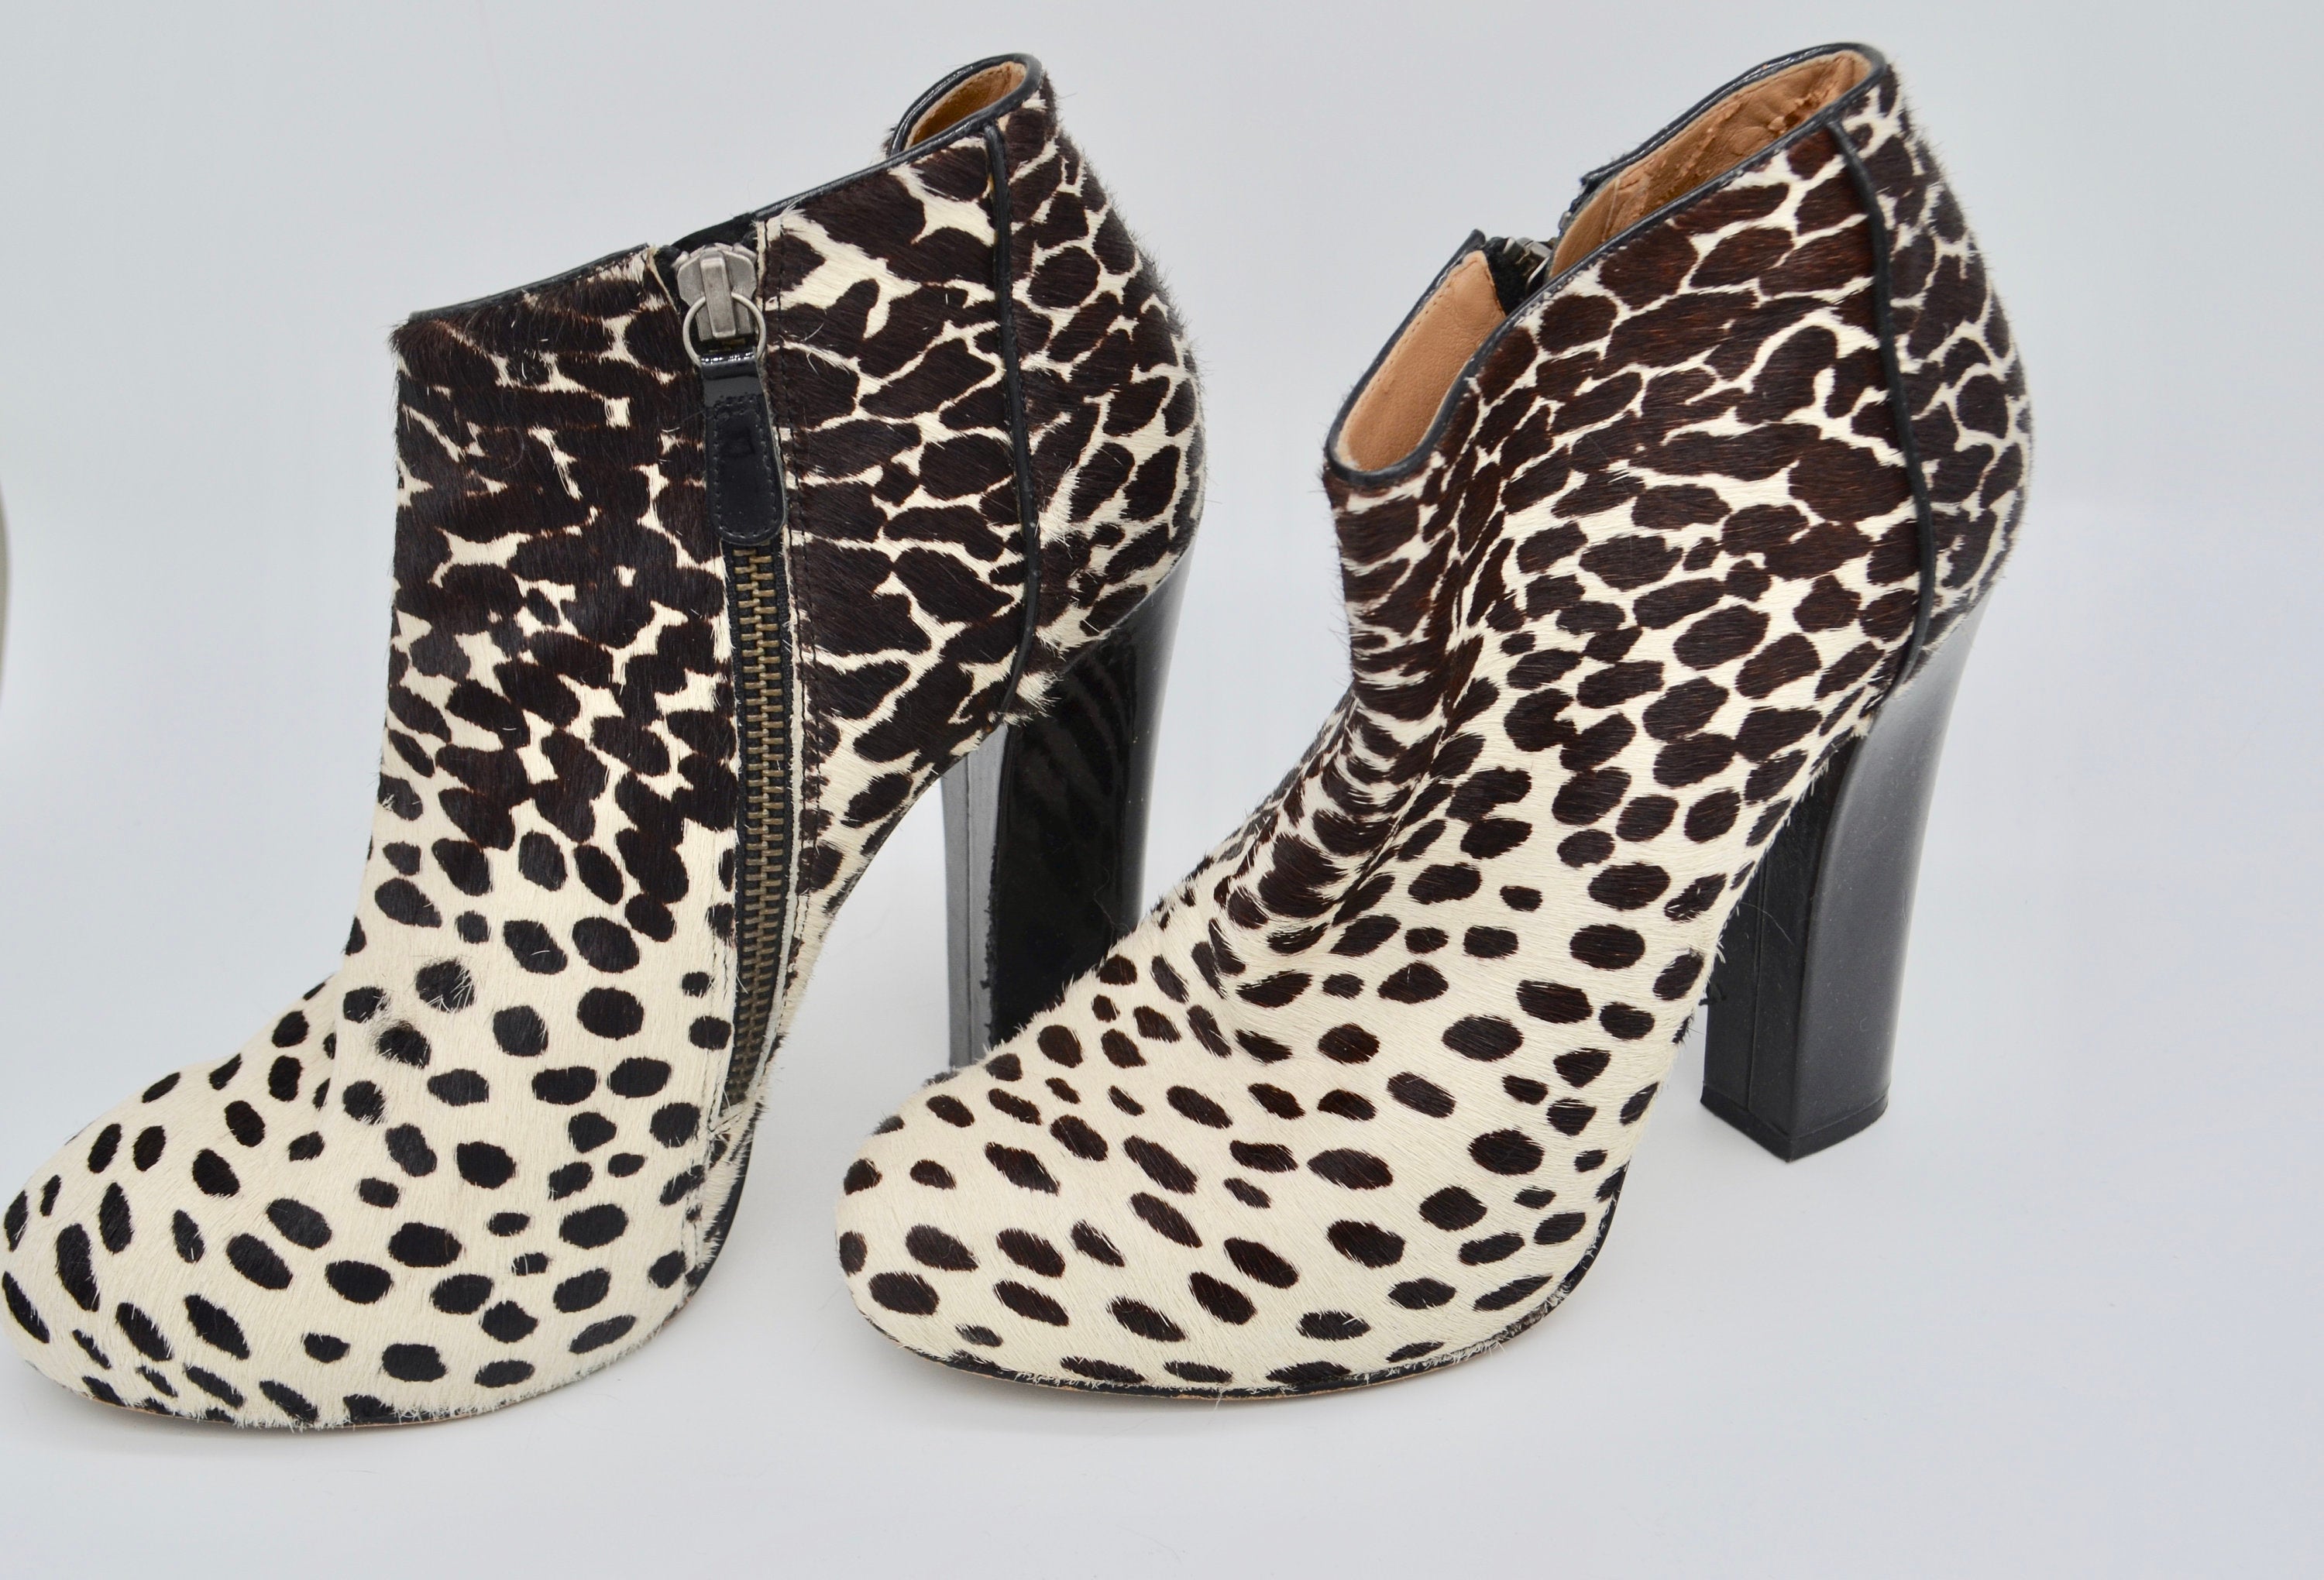 Anne Klein Animal Print Ankle Boots Leather Leopard-Print Calf Hair Booties Bohemian Shoes Autumn